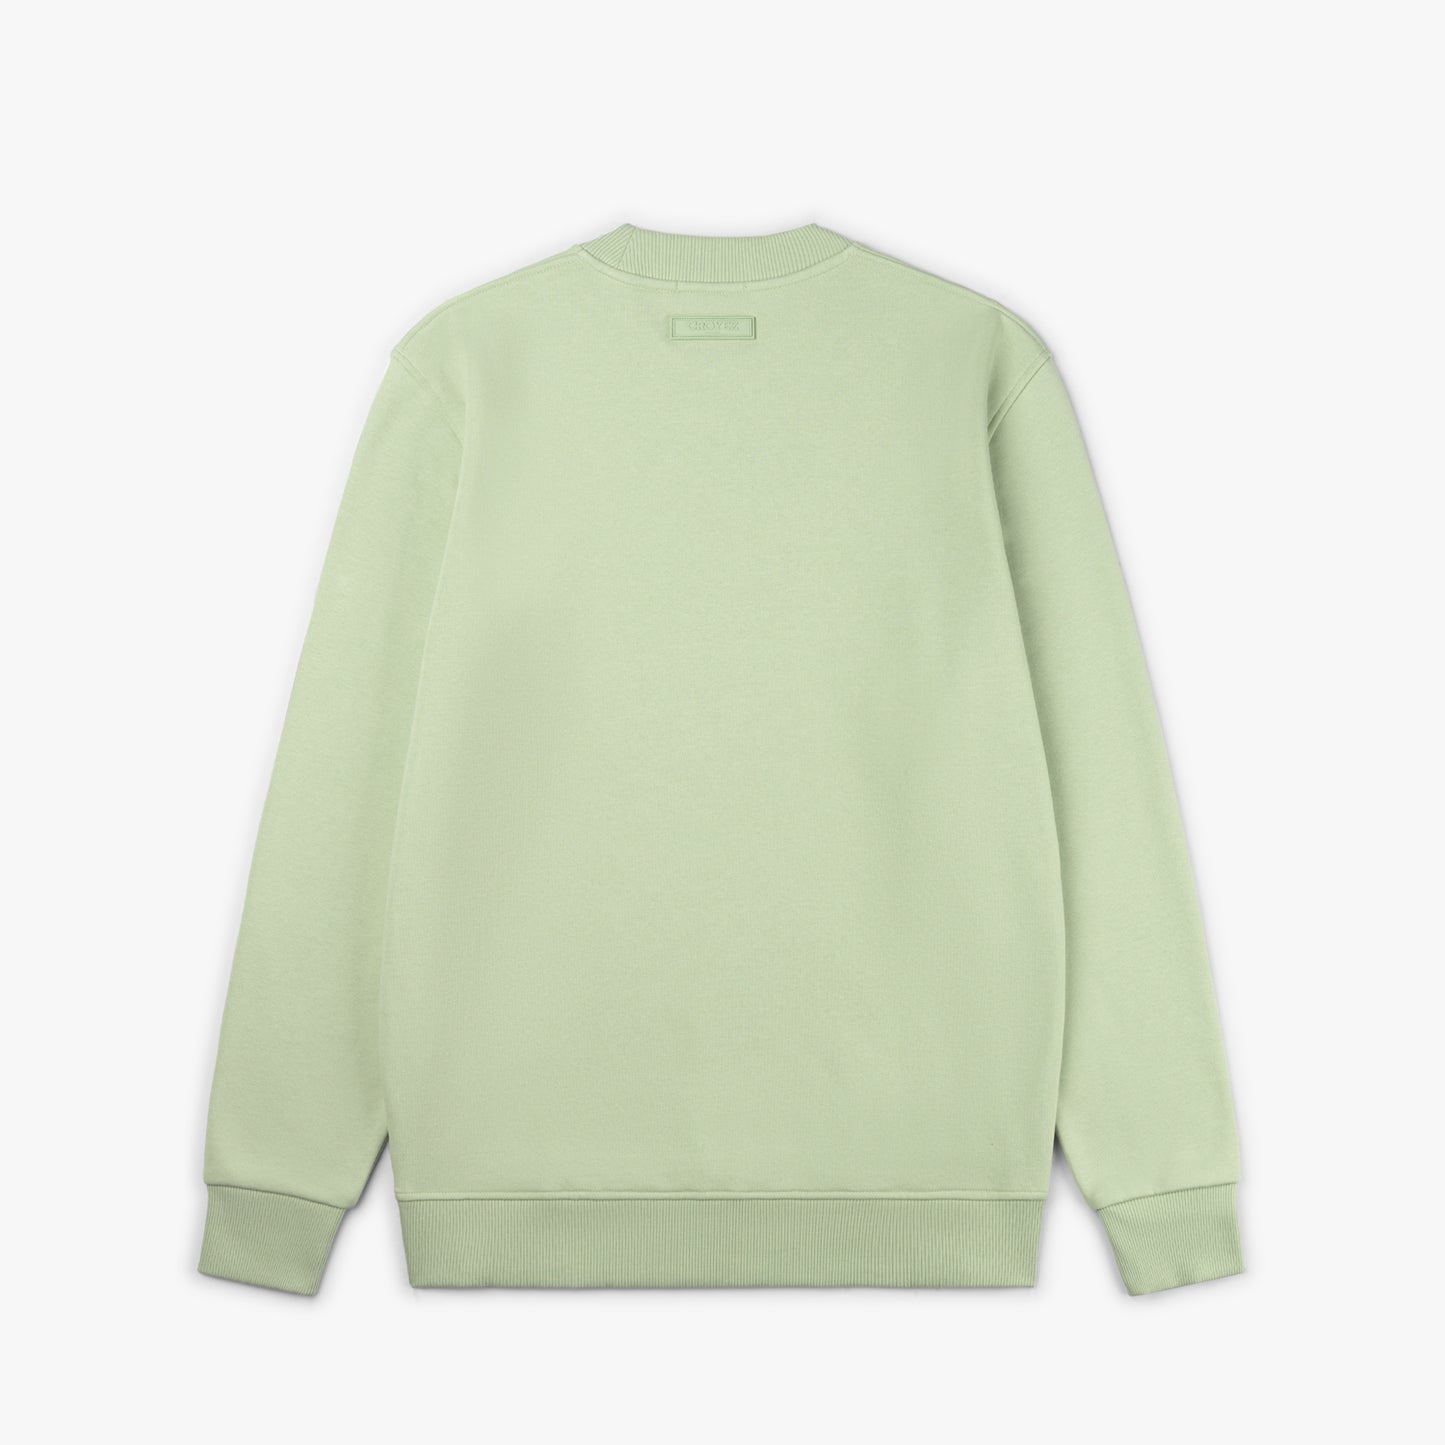 CROYEZ ABSTRACT SWEATER - GREEN